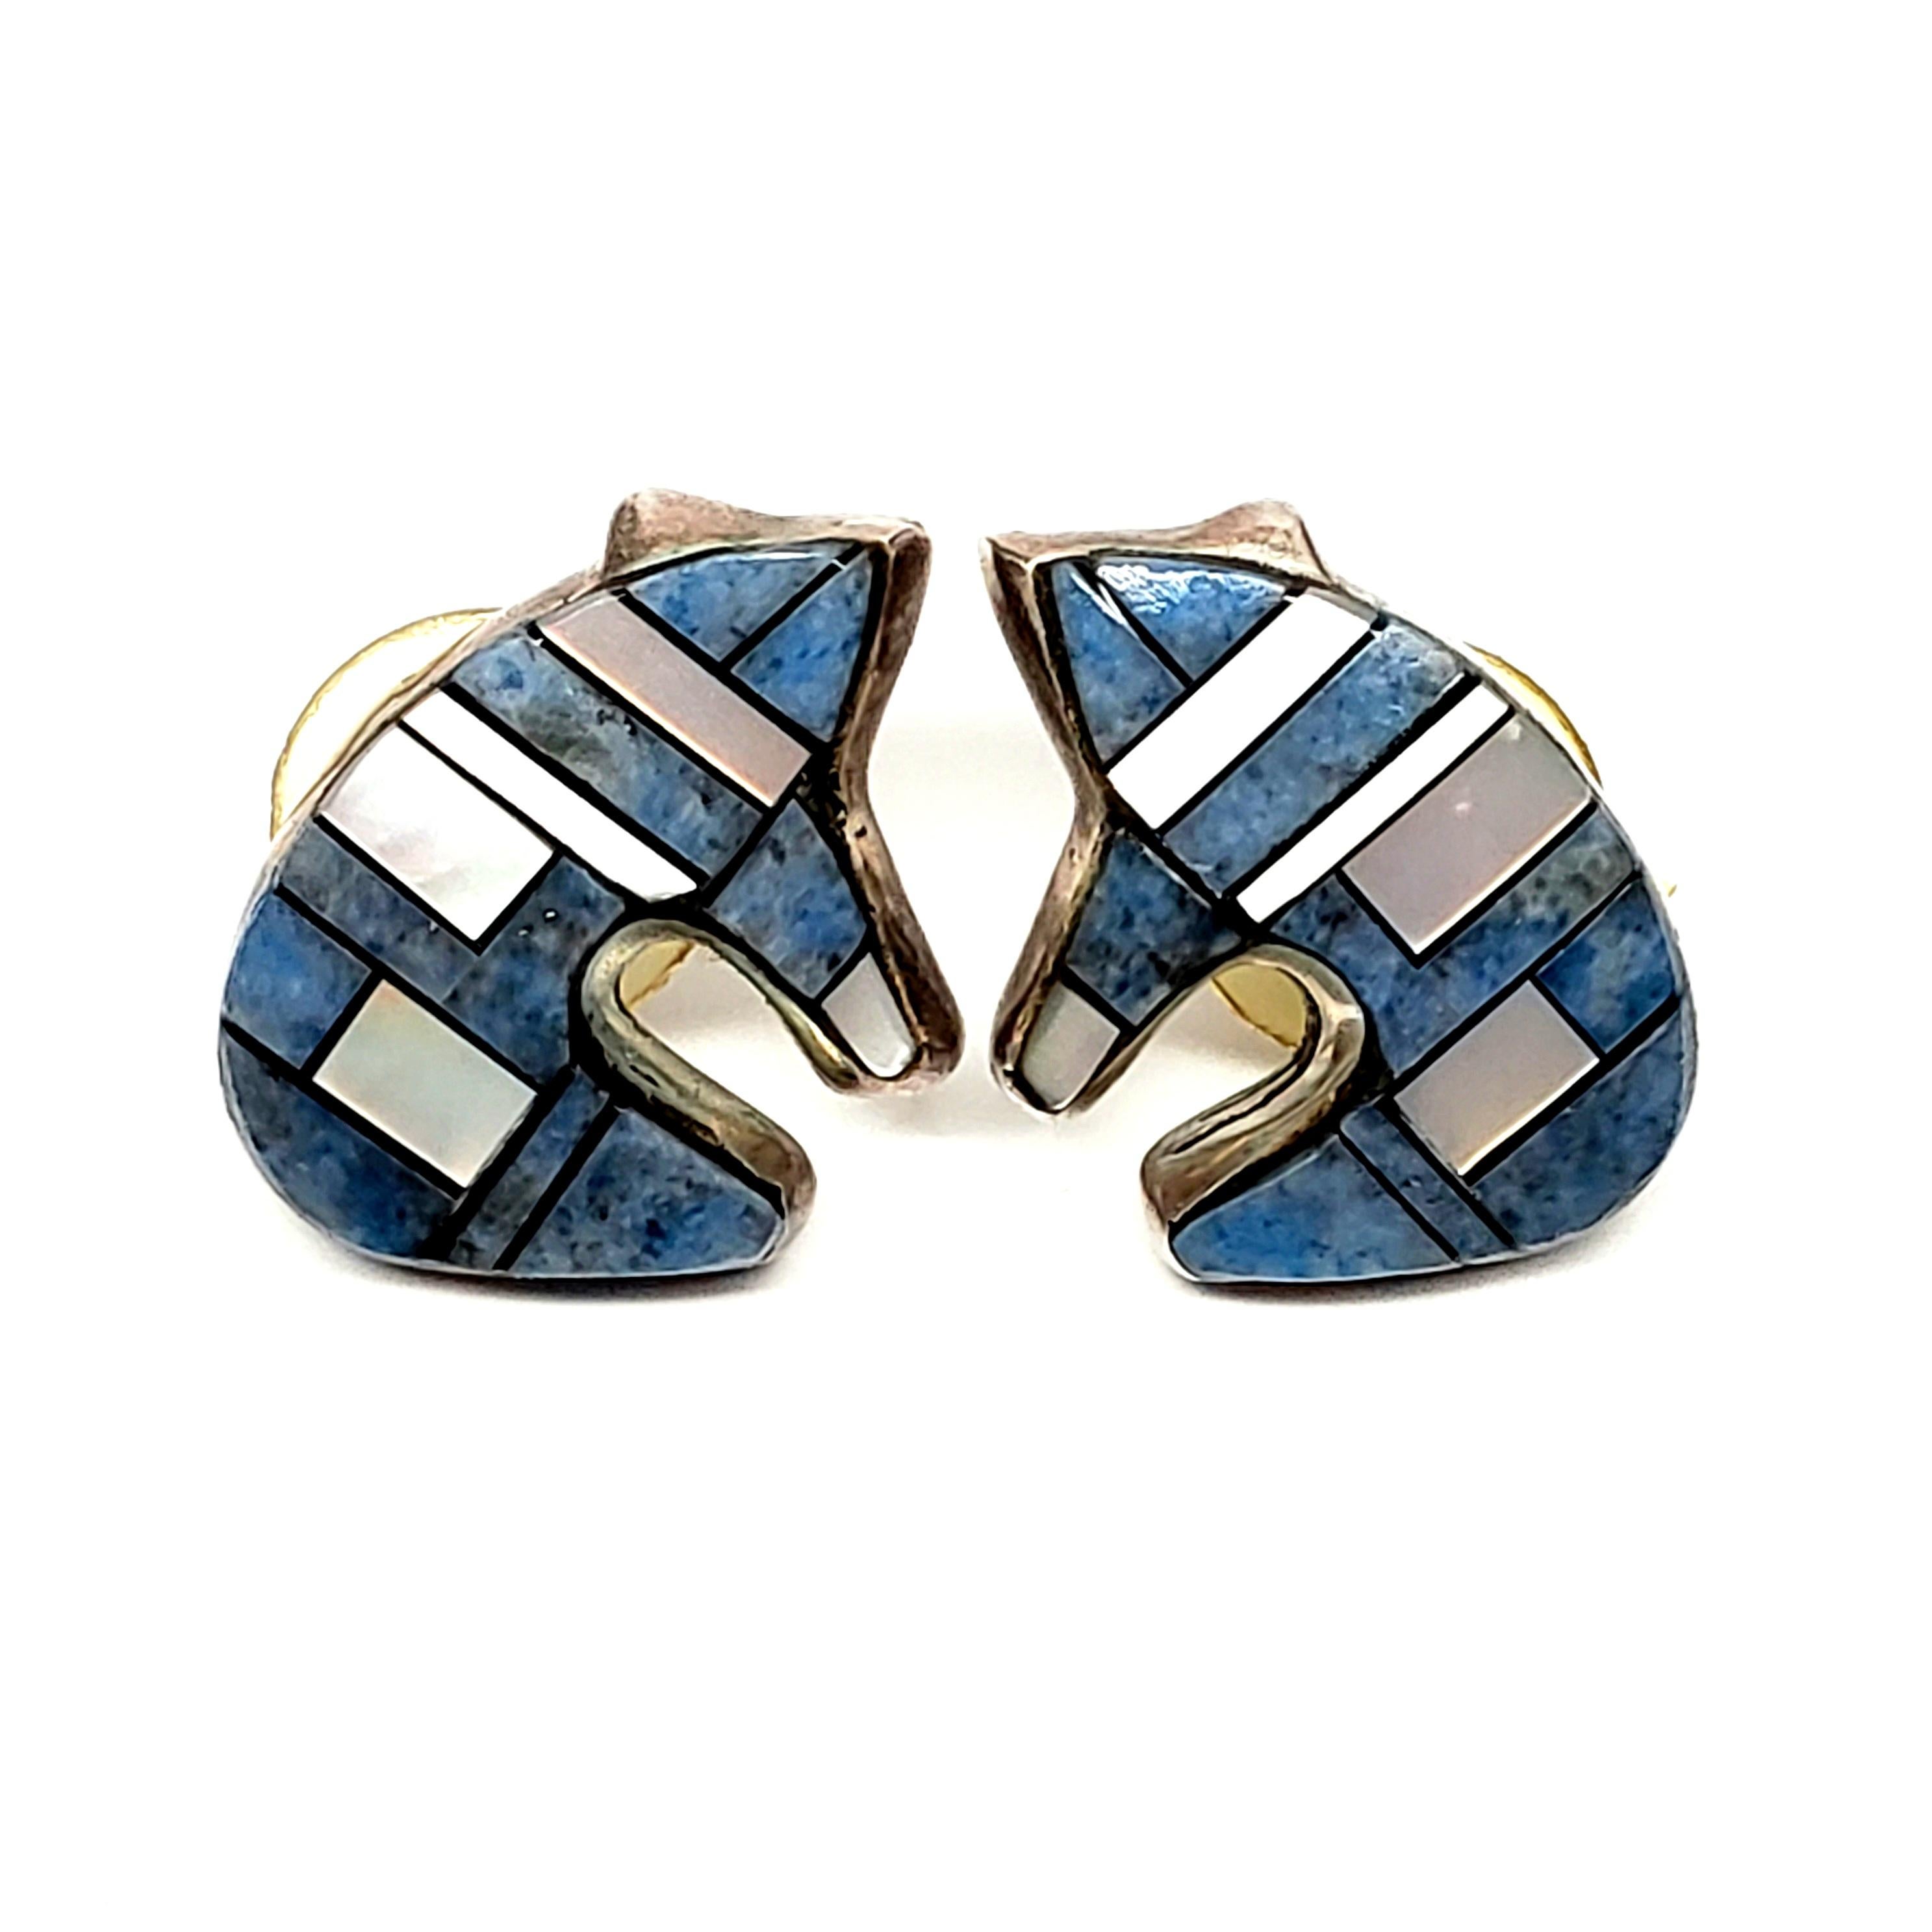 Sterling silver and inlay mosaic bear earring by Native American artisan, signed AY.

The bear symbolizes a fierce warrior and great hunter. Features beautiful and intricate channel inlay of denim lapis lazuli and mother of pearl.

Measures approx